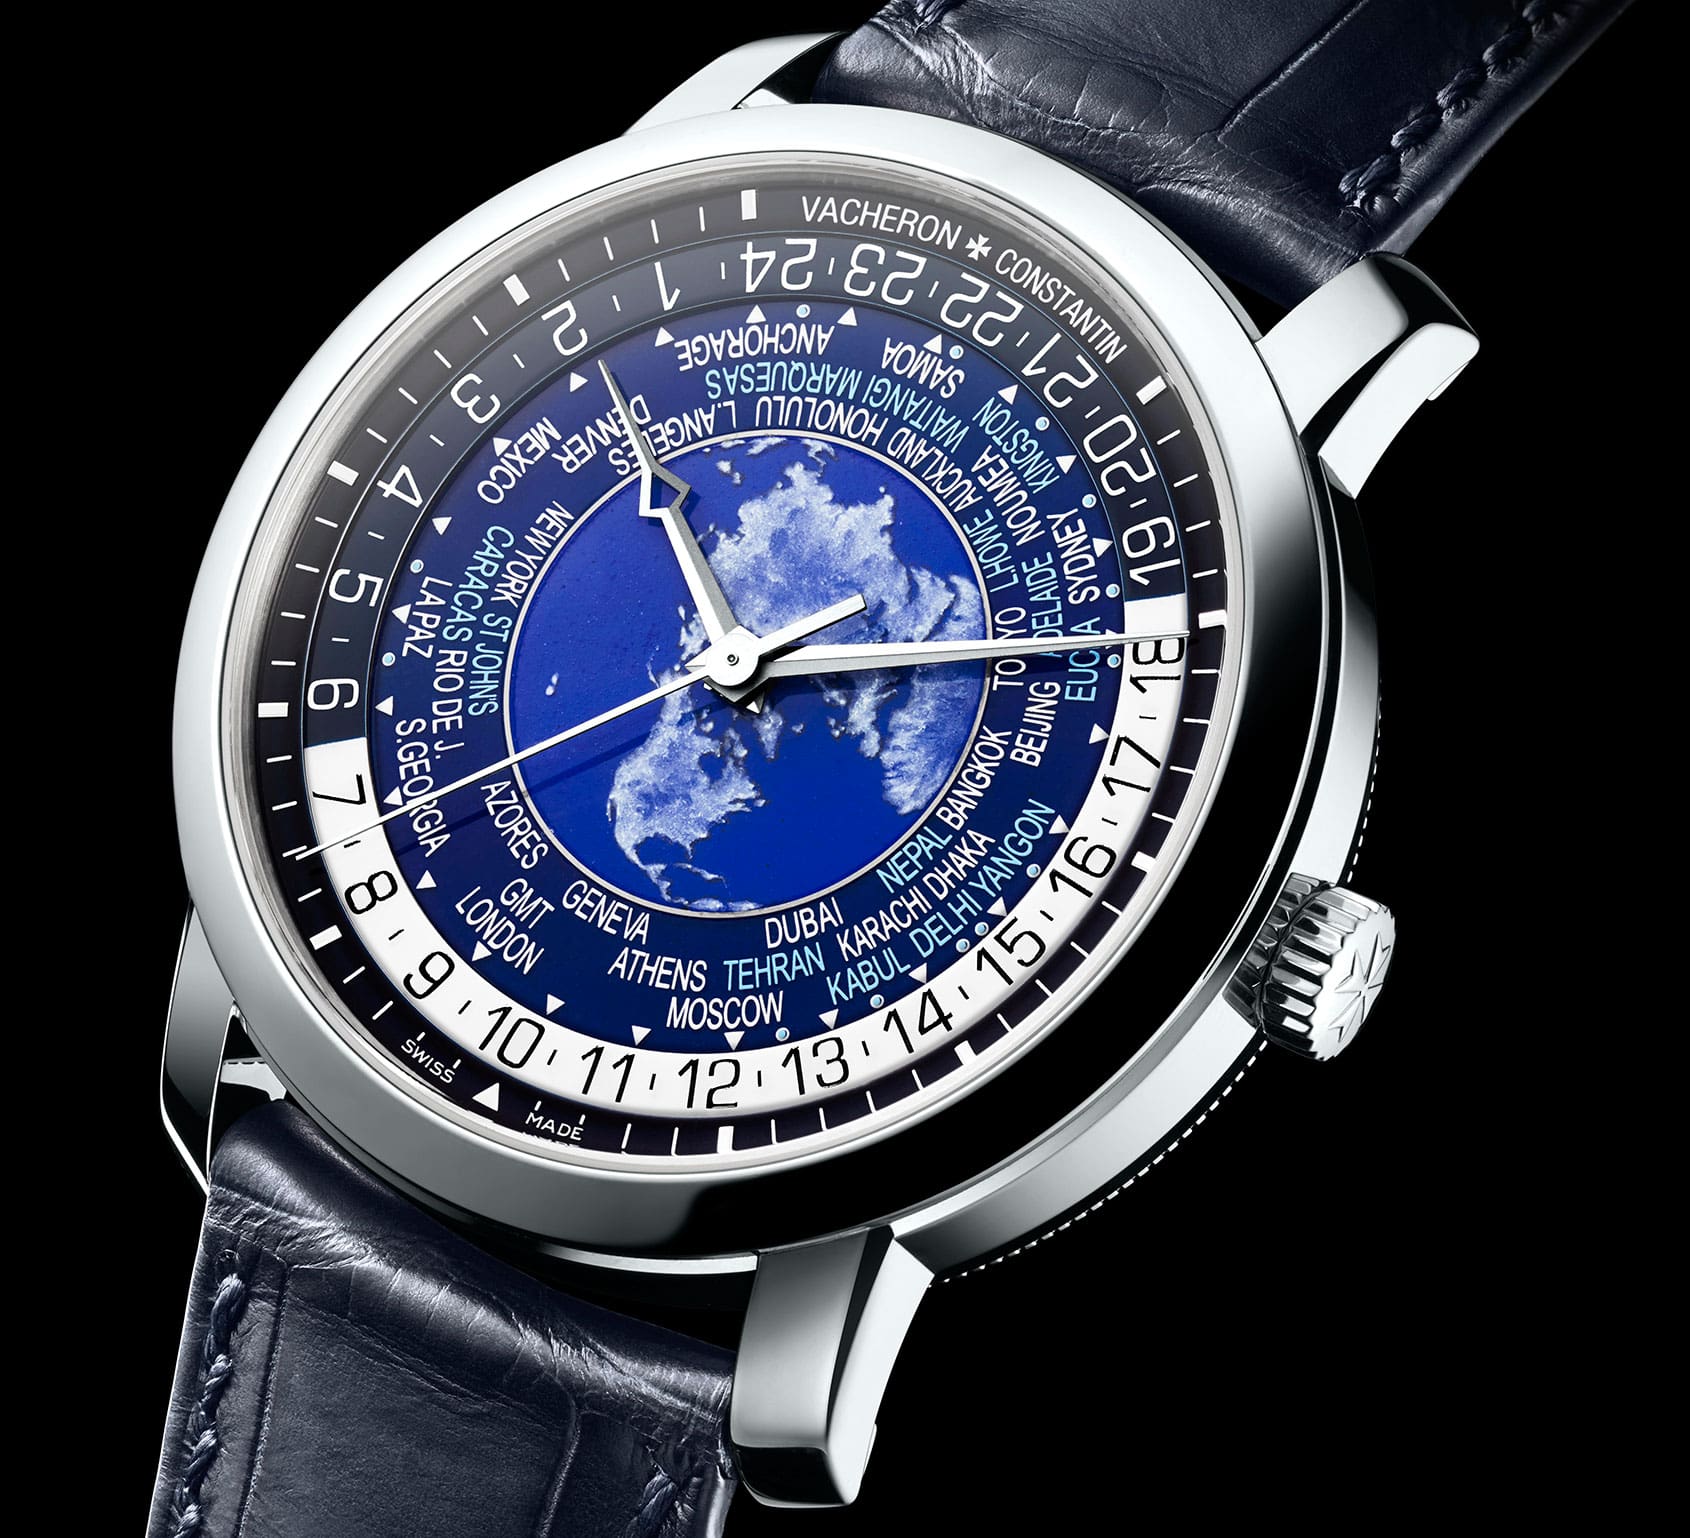 INTRODUCING: See the world as never before with the Vacheron Constantin Traditionnelle World Time